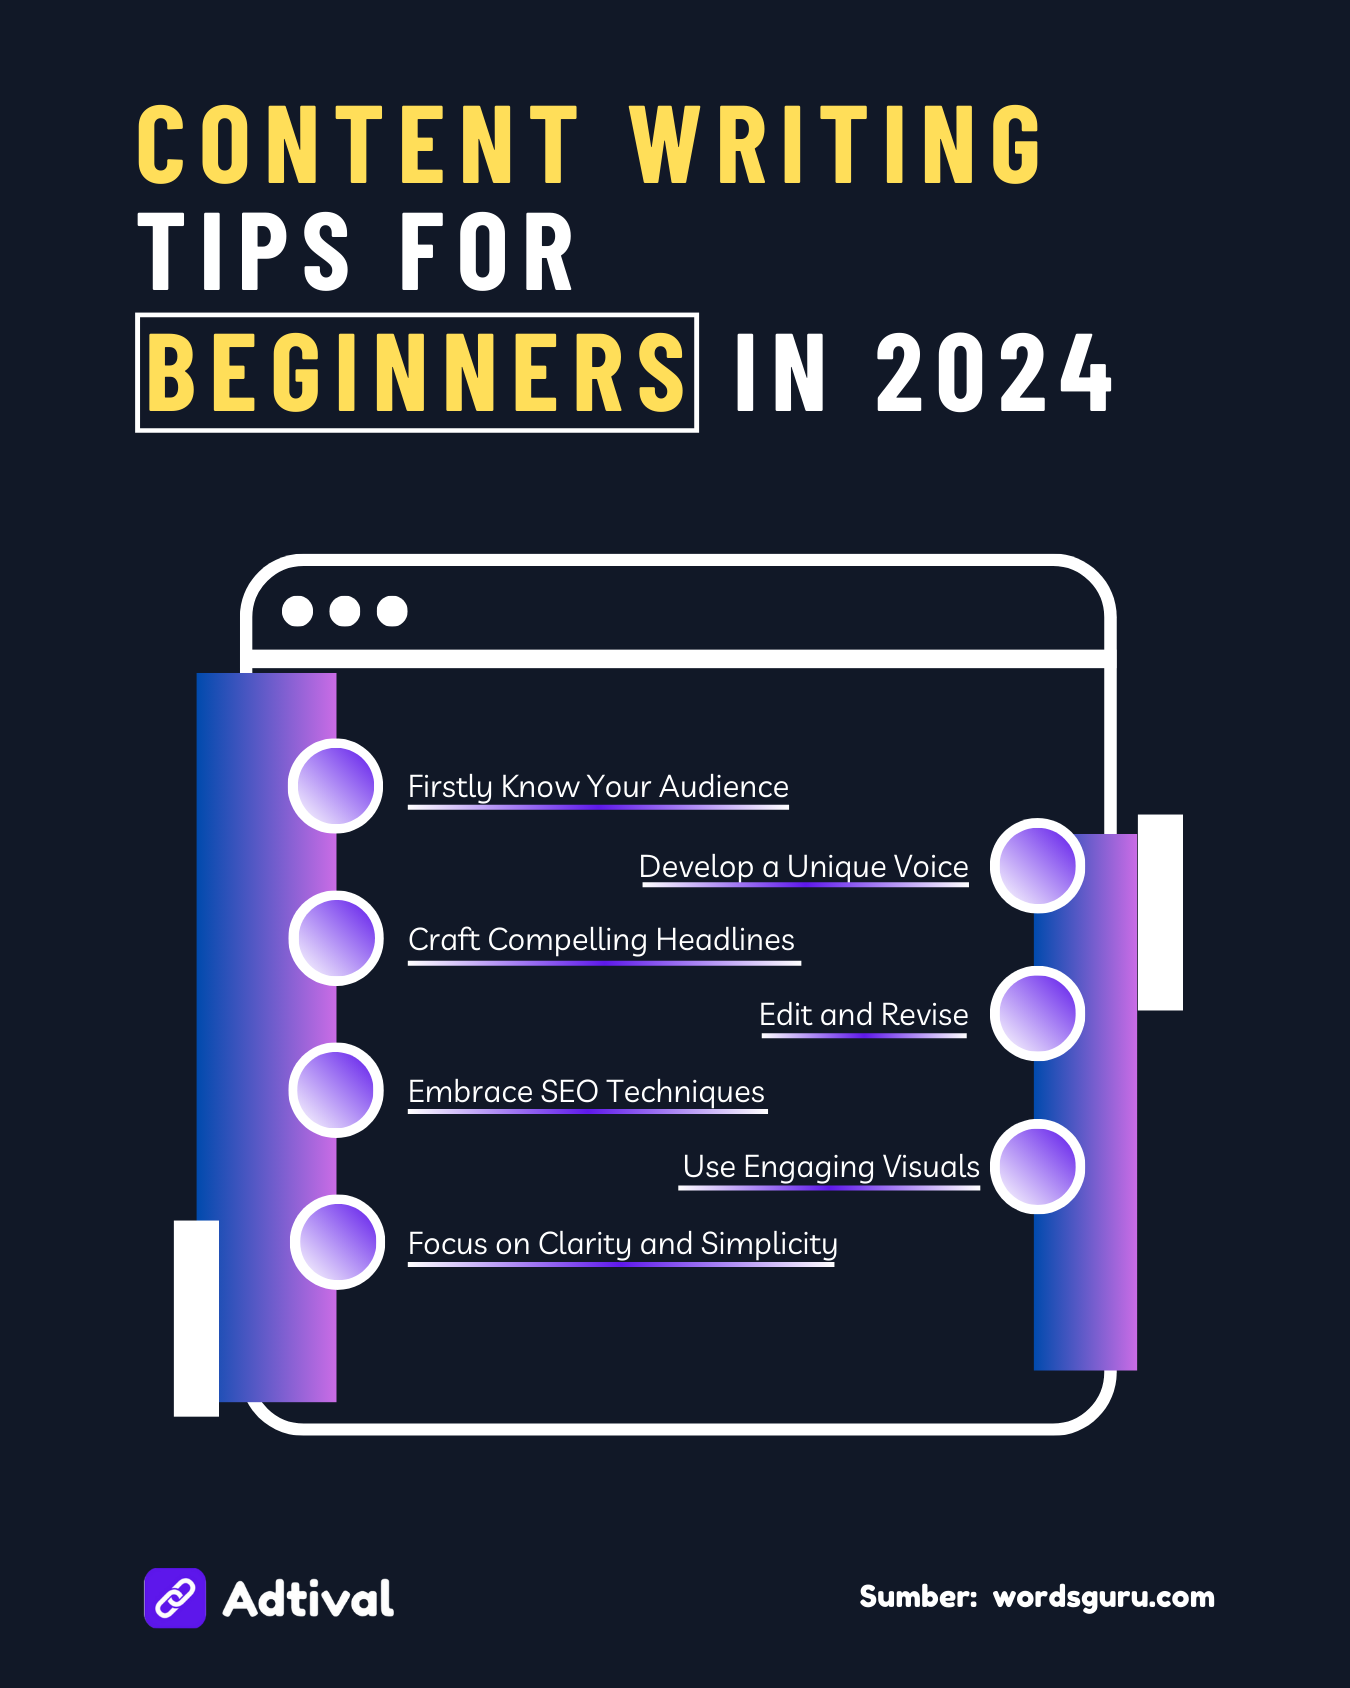 Content Writing Tips for Beginners in 2024